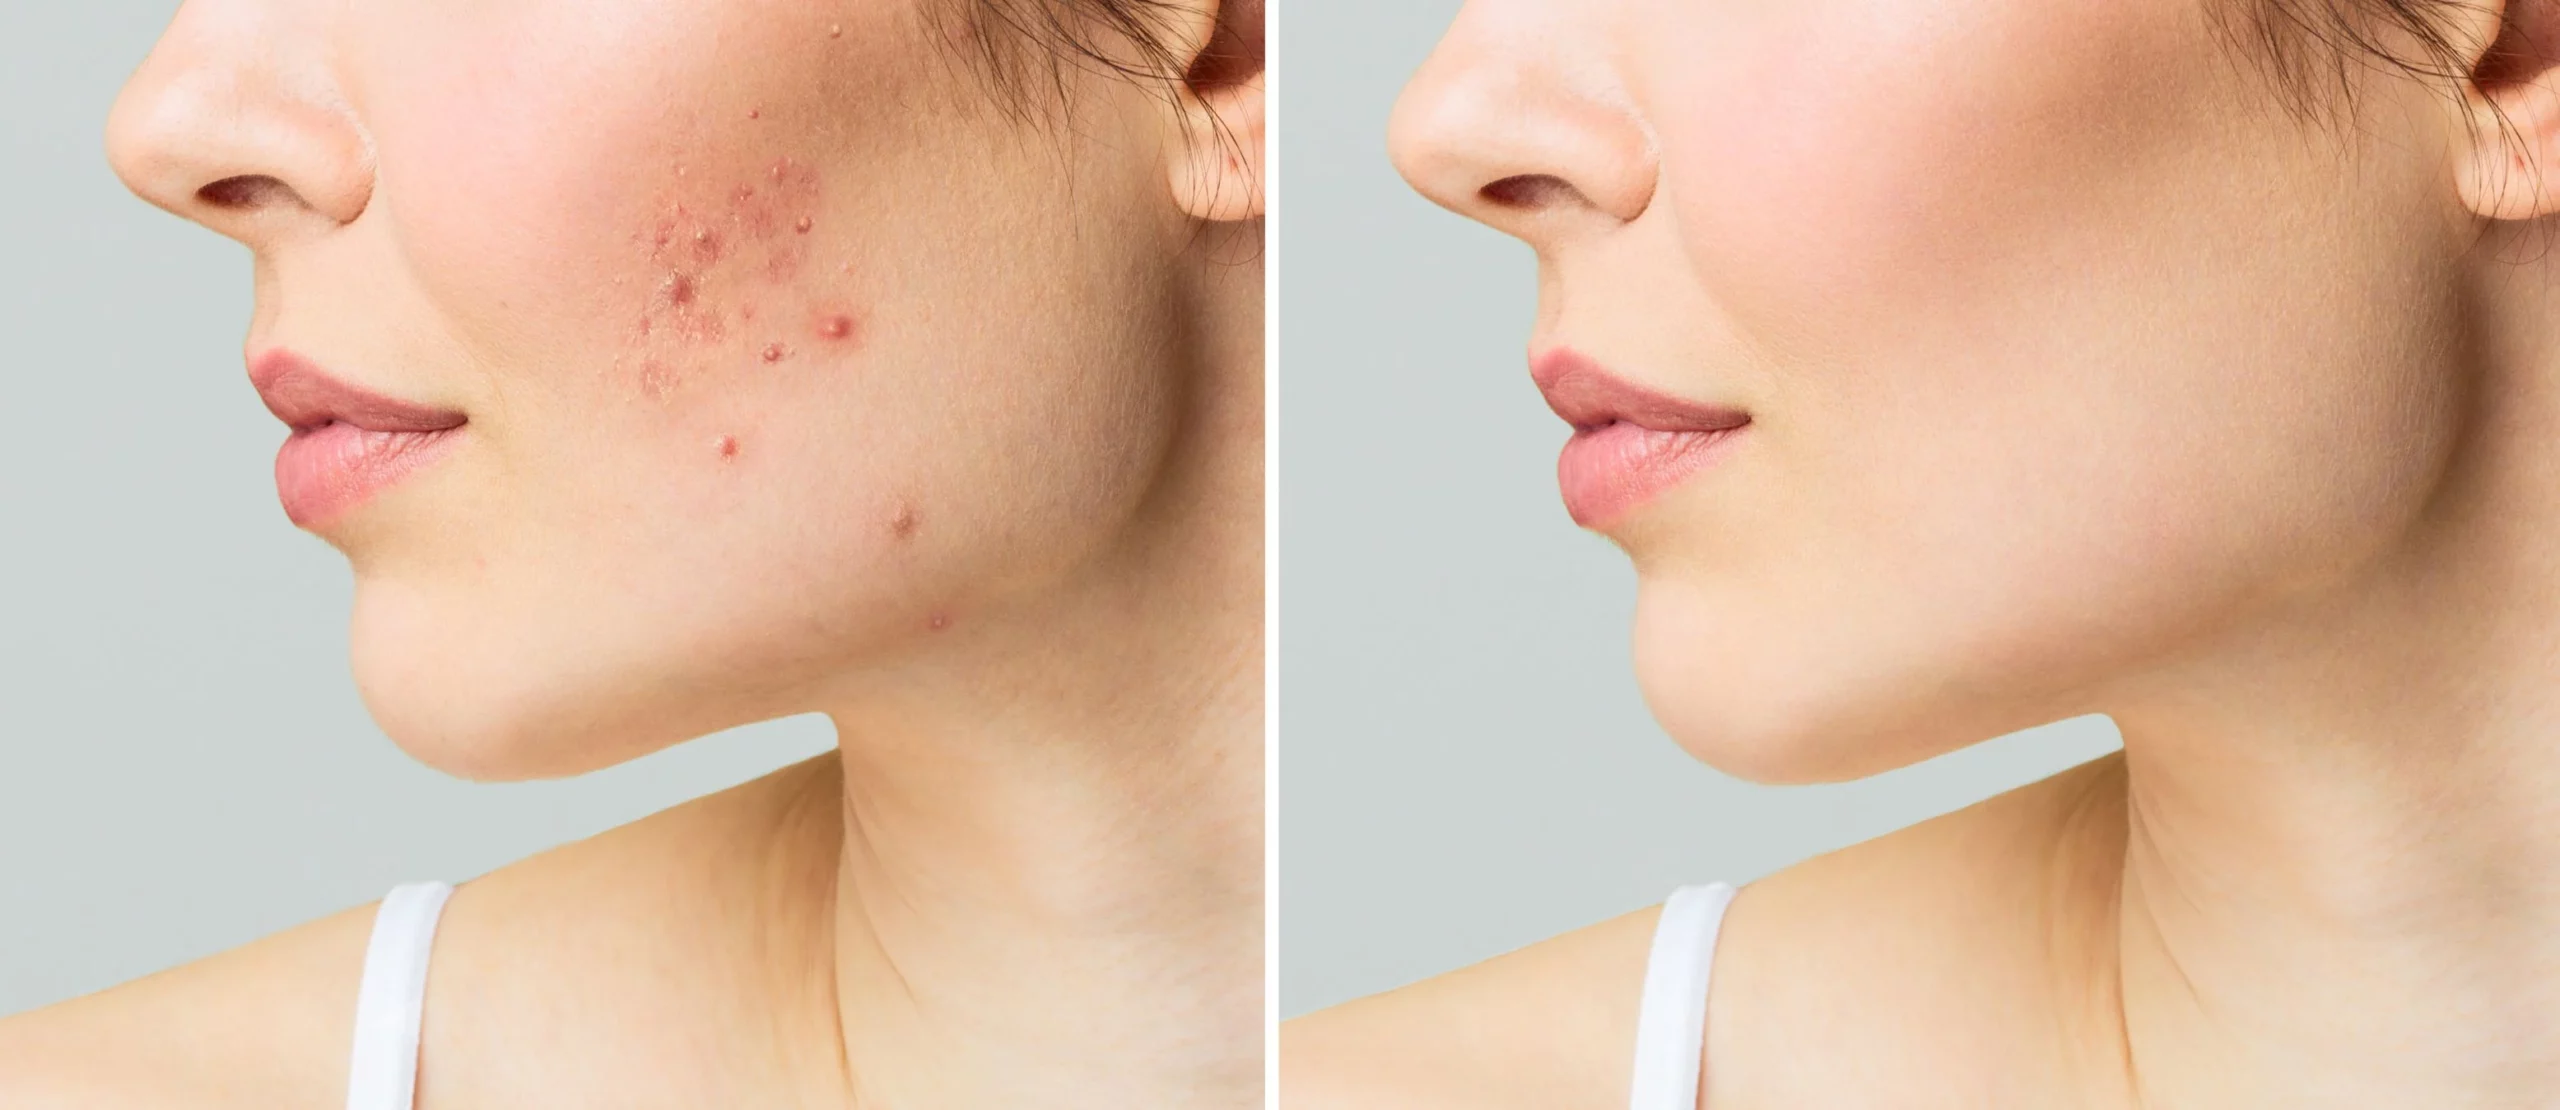 Acne purifying facial before and after images